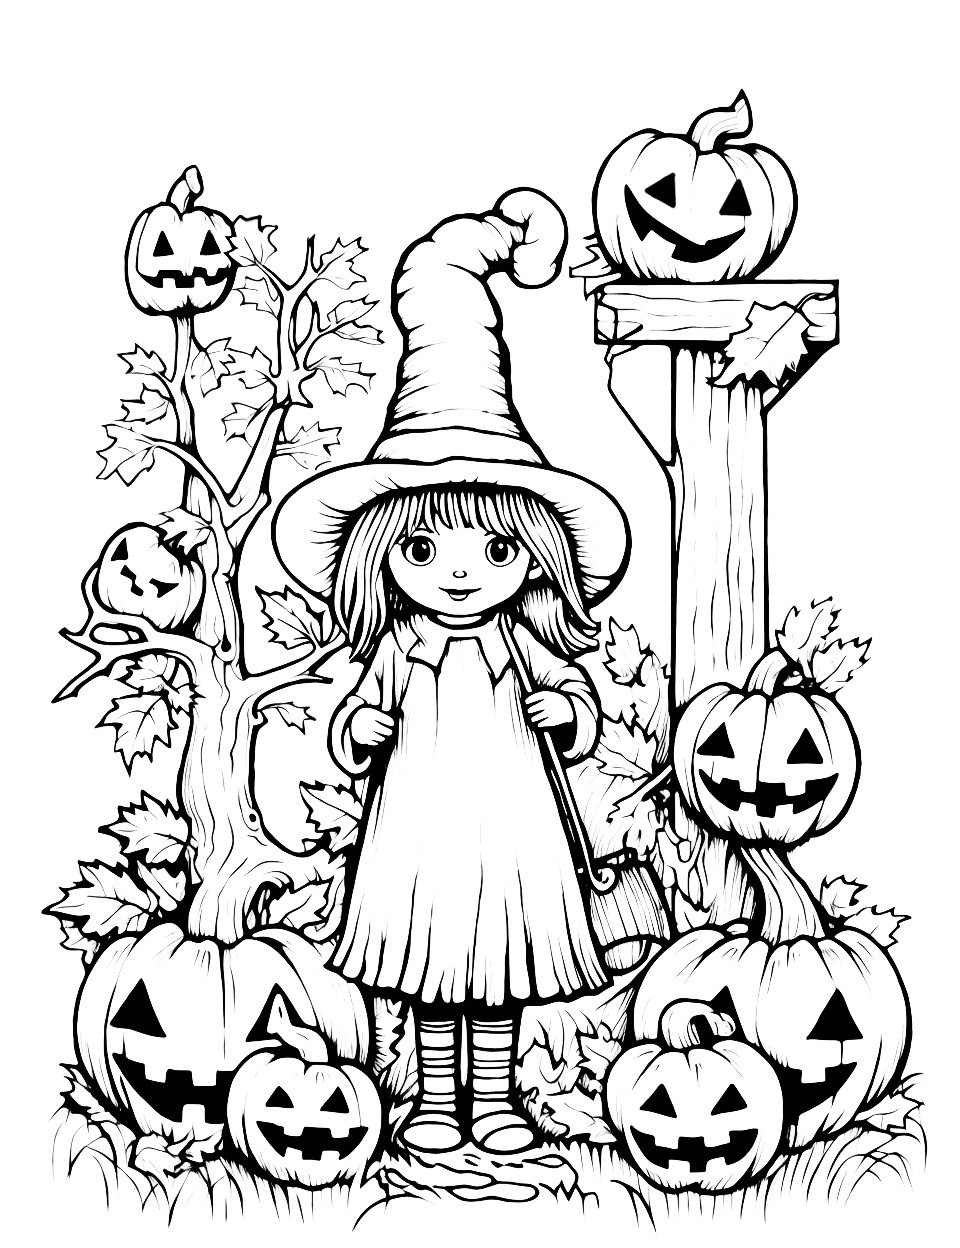 Witch's Garden Halloween Coloring Page - A garden scene showing a witch surrounded by pumpkins.